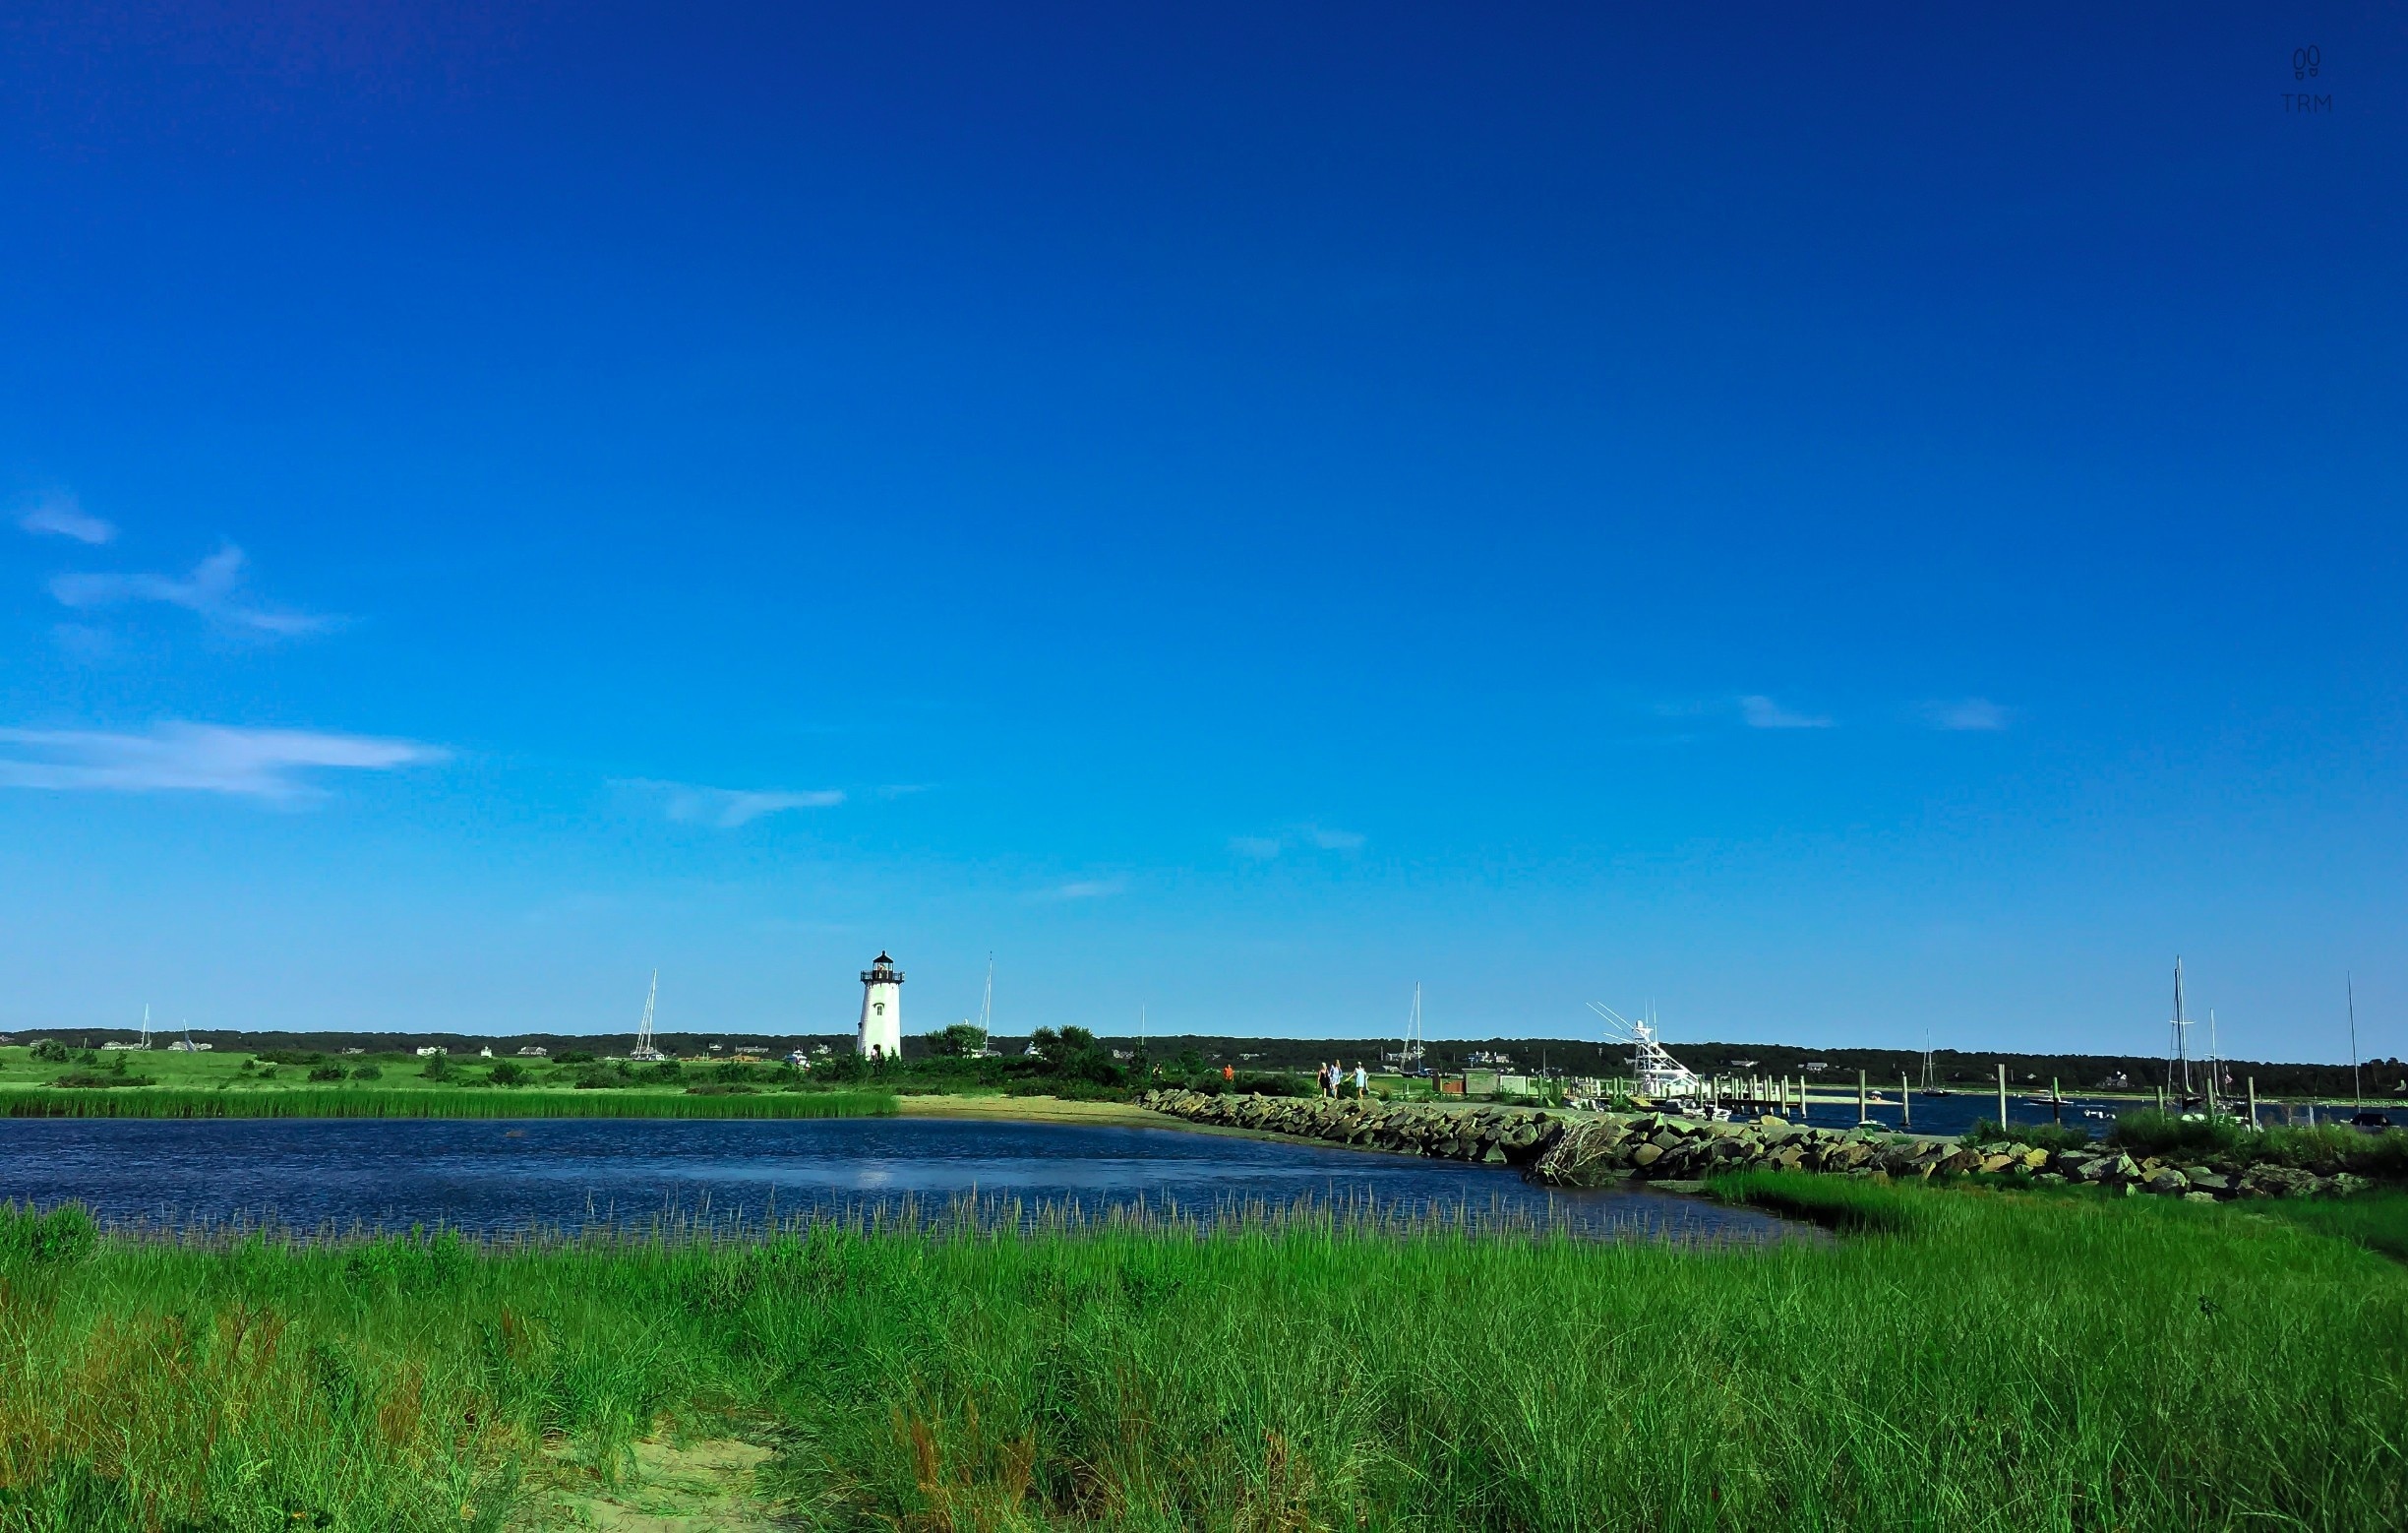 Sandy beaches, farmlands, fishing docks, harbor towns and tall lighthouses, Its Martha's Vineyard! It is around an hour of boat ride from Cape Cod to the Oak Bluffs. MV accessible only by boat or air. 
This picture was of course taken in summer :) Bright sunny day with blue sky and lush green. In the background is the famous east chop lighthouse. The best of my memories of MV are from East Chop.   We rented a bright Red scooter near the Oak Bluffs harbor after getting off from ferry, kicked off our slippers, rode to the sunset ;) I meant we drove to East Chop:)

Must Do : Get that pretty but awfully slow red scooter, drive to the light house, live the dream :)